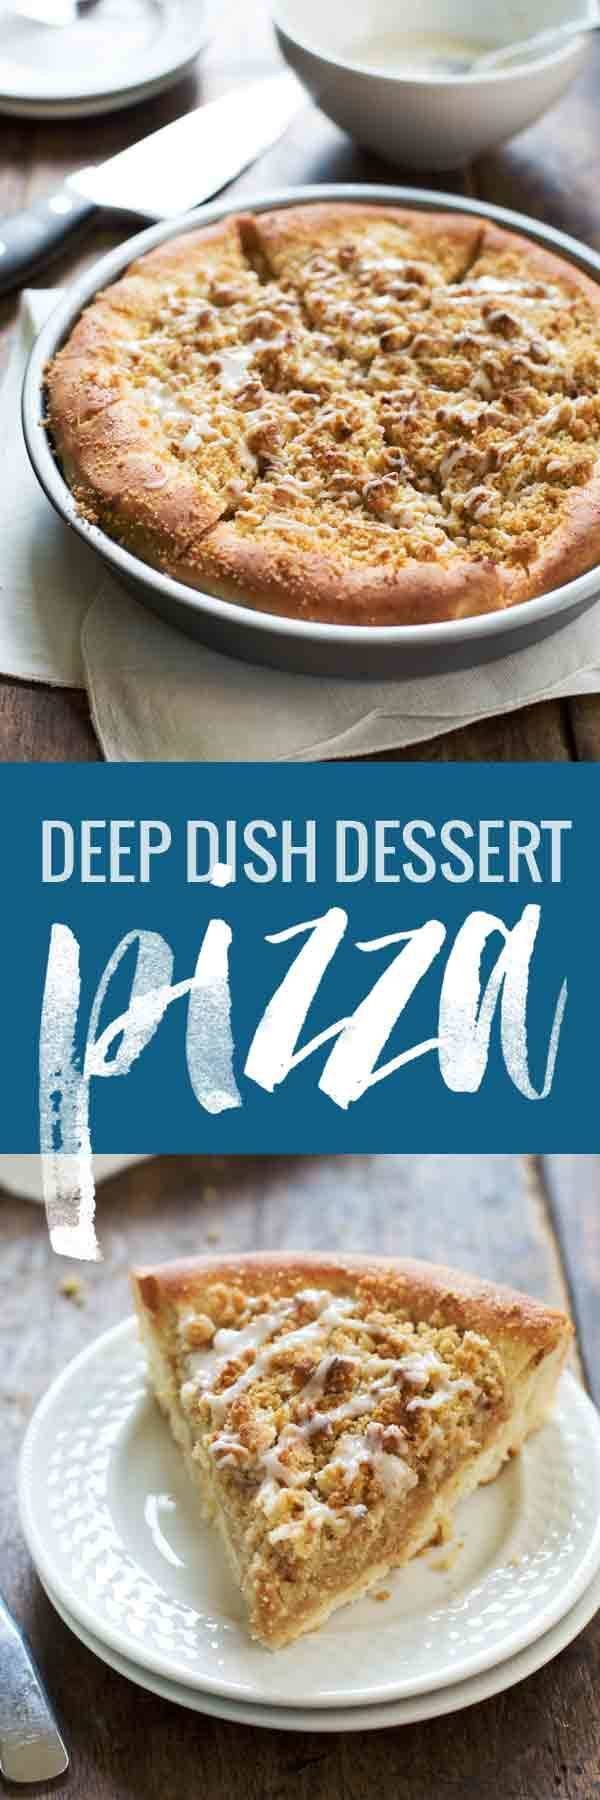 This Deep Dish Cinnamon Streusel Dessert Pizza has buttery brown sugar streusel crumbles and creamy maple glaze. 30 minutes from start to finish.